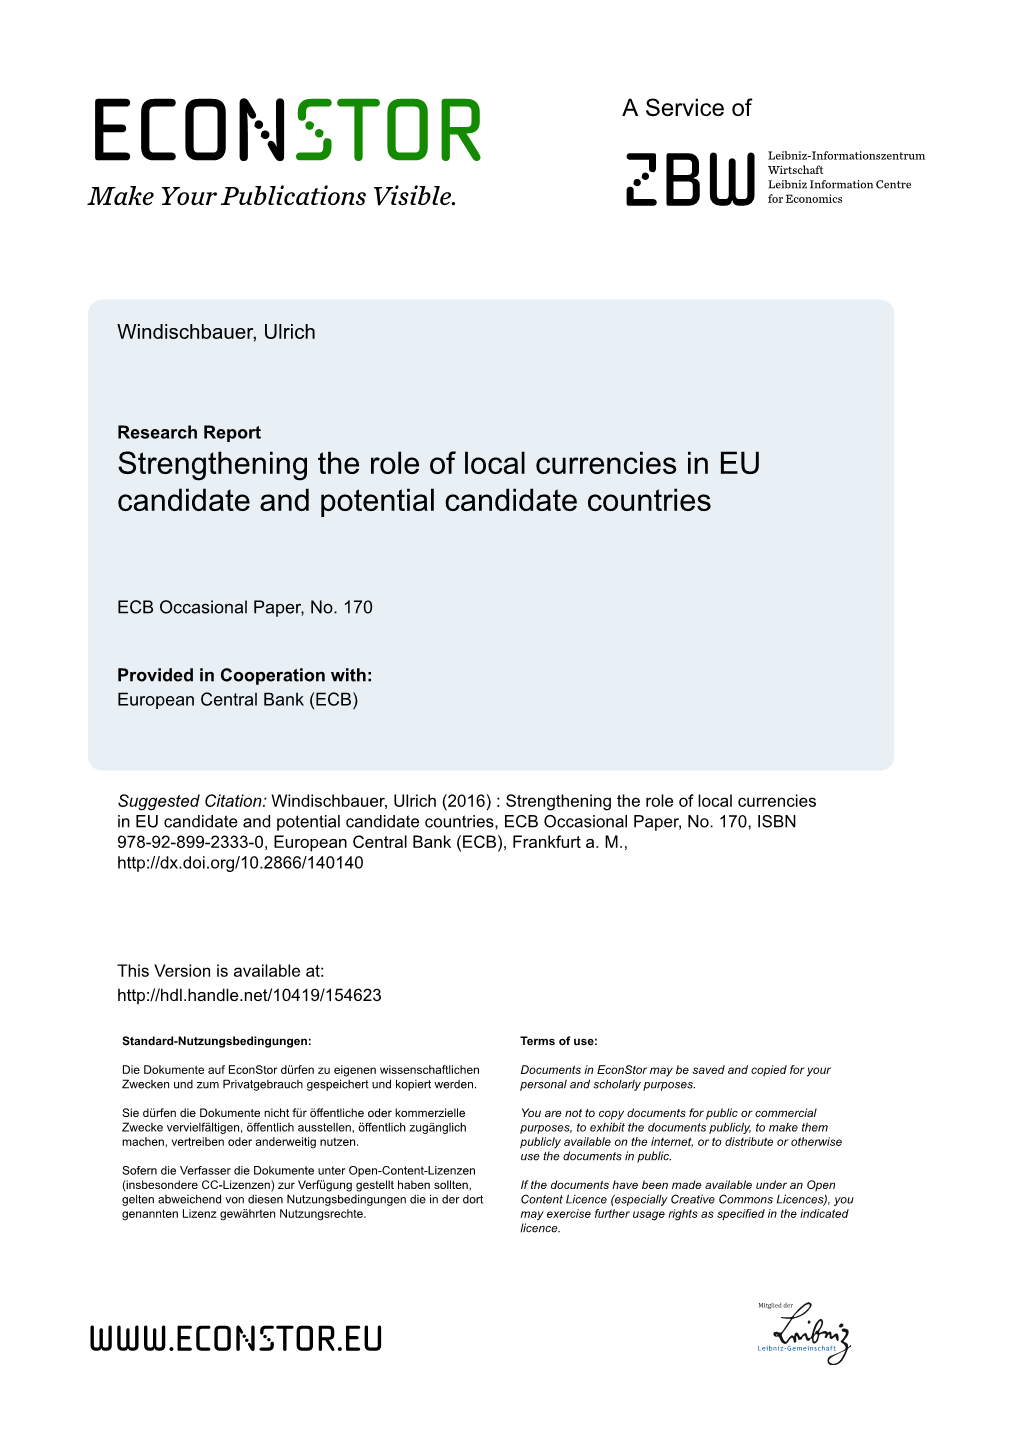 Strengthening the Role of Local Currencies in EU Candidate and Potential Candidate Countries